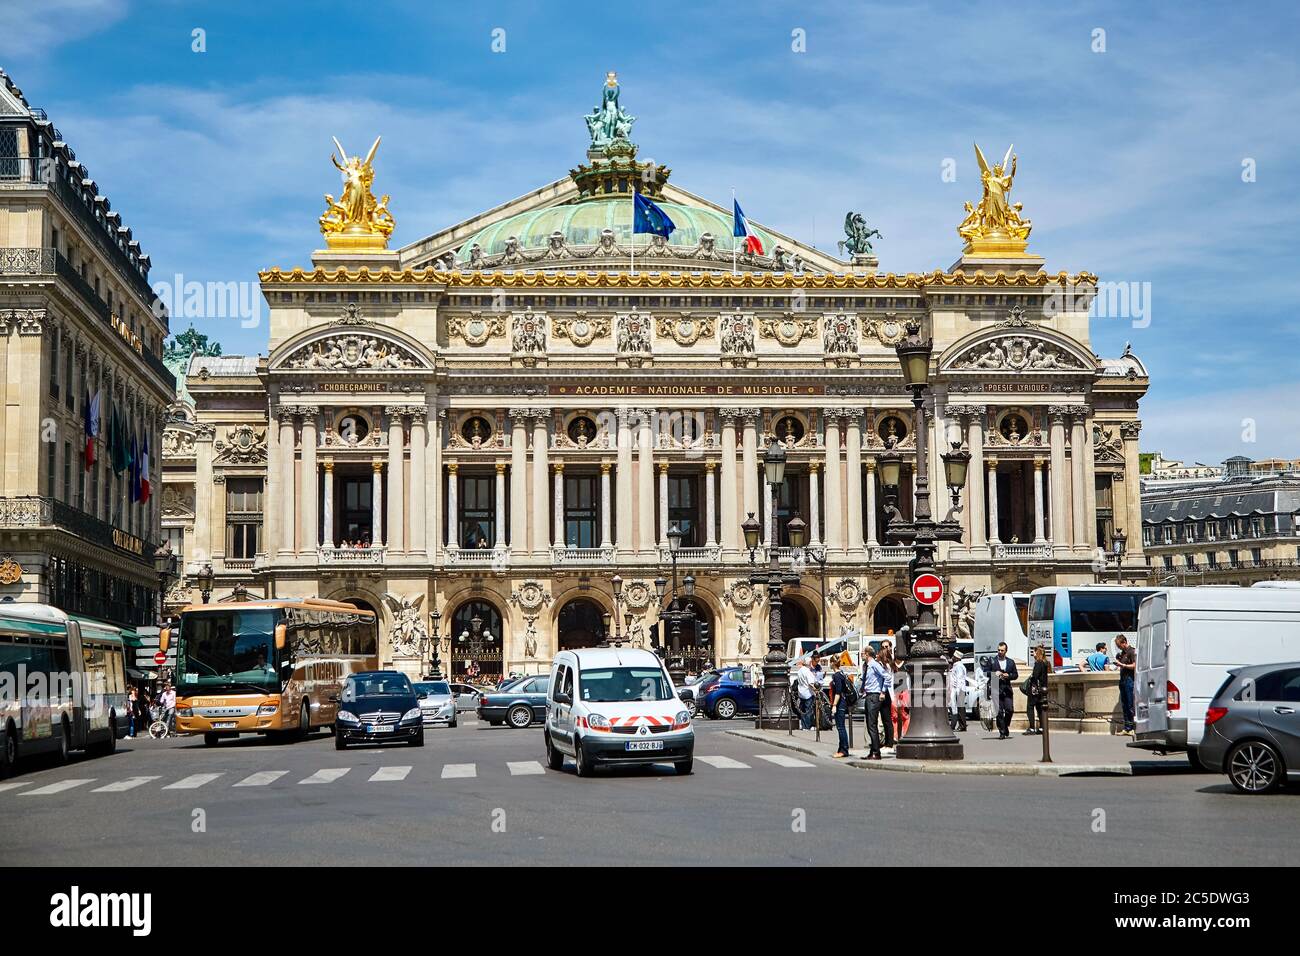 Paris, France - June 29, 2015: Palais or Opera Garnier & The National Academy of Music (Grand Opéra). Cars and pedestrians in the square in front of t Stock Photo